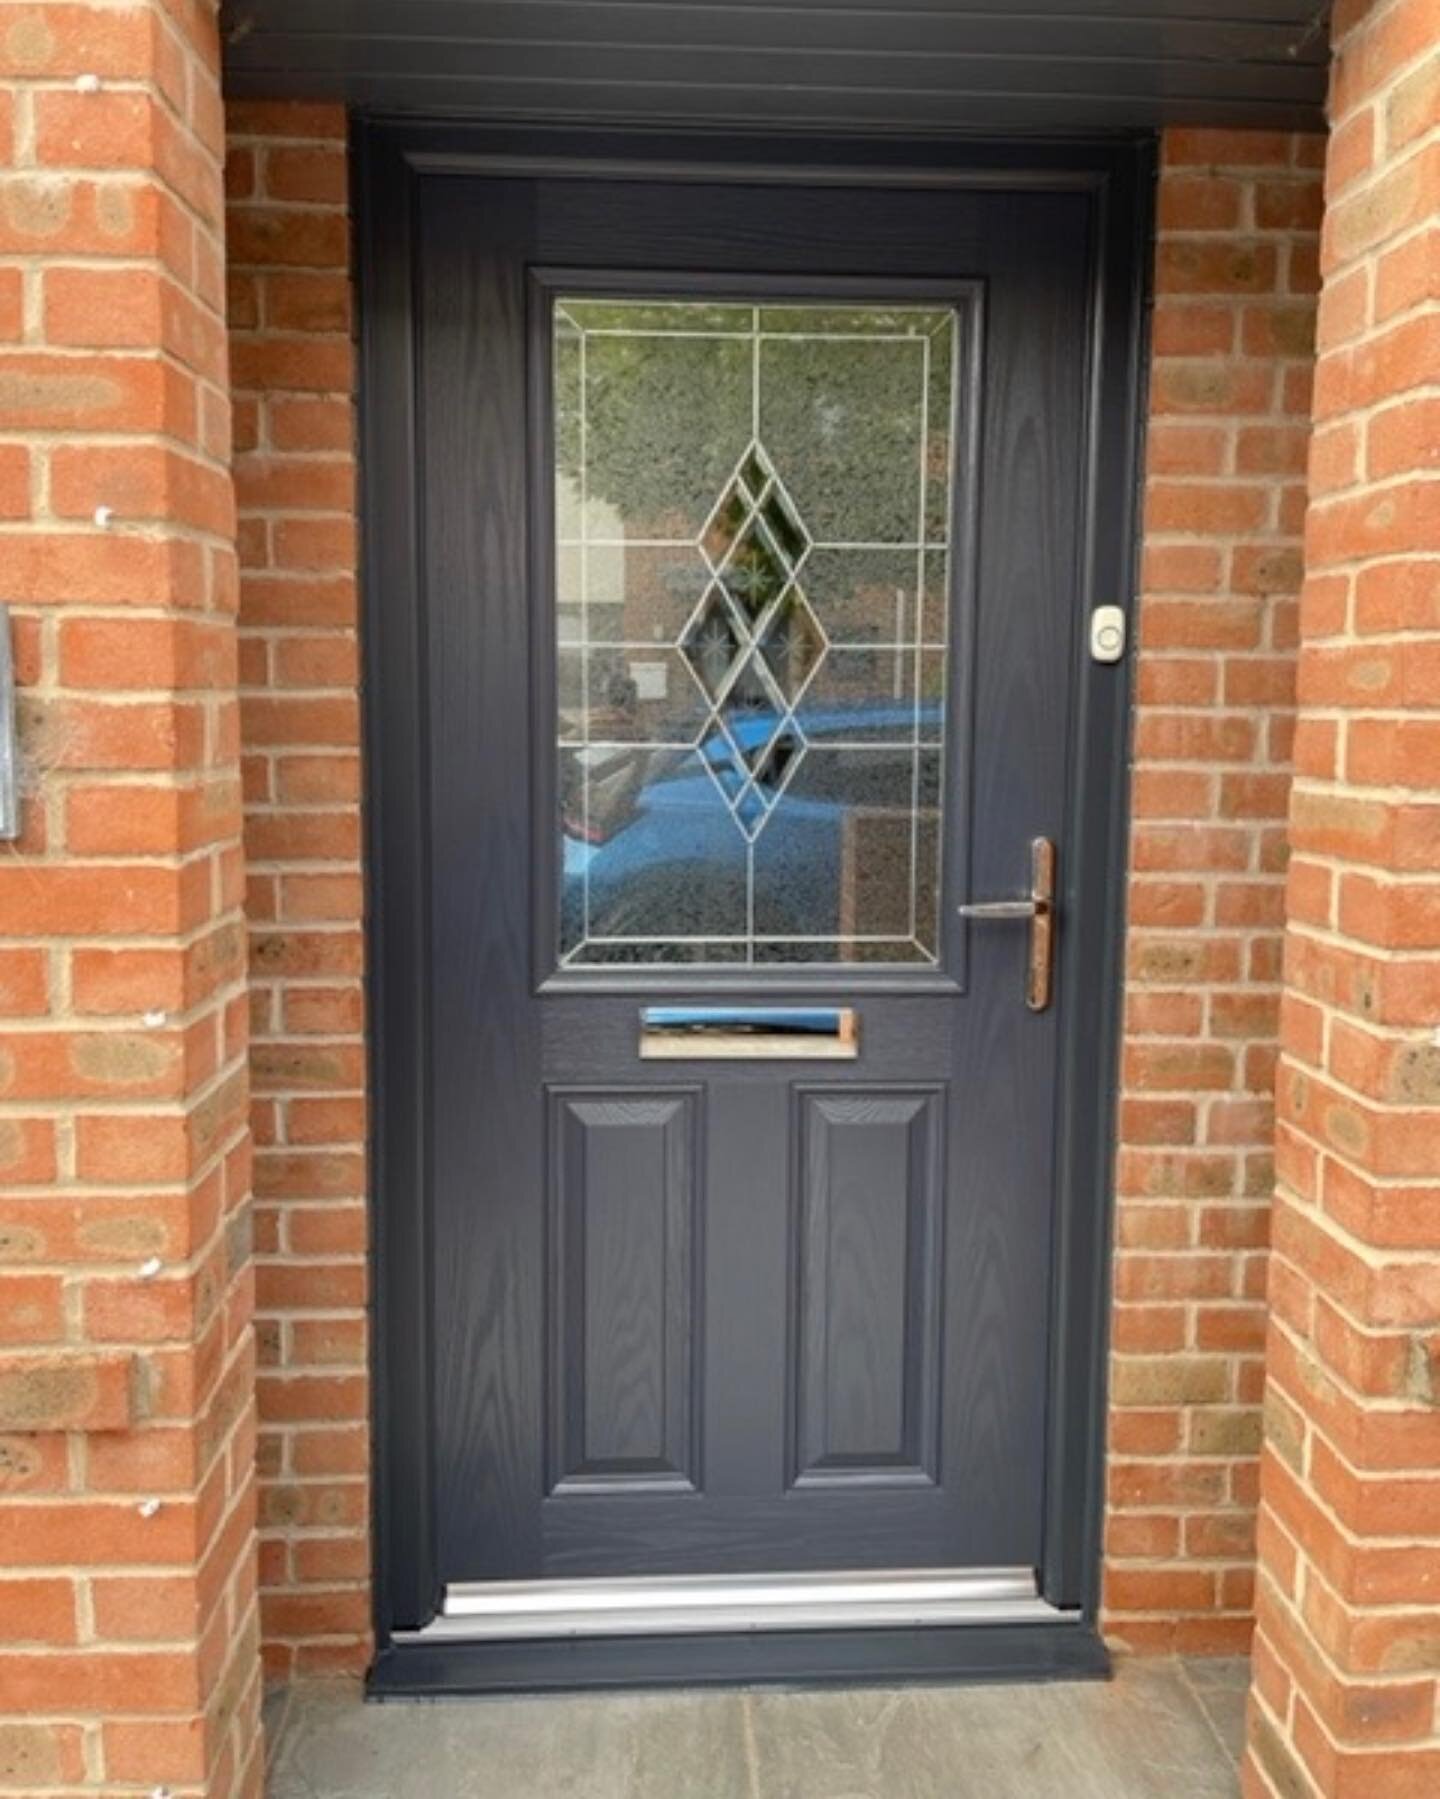 After ➡️ Before. 

This is our &lsquo;Virgo&rsquo; composite door with &lsquo;Kara&rsquo; glass in the colour Anthracite grey. 

A new composite door can make such a big change to the front of your property!

#EssentialRange